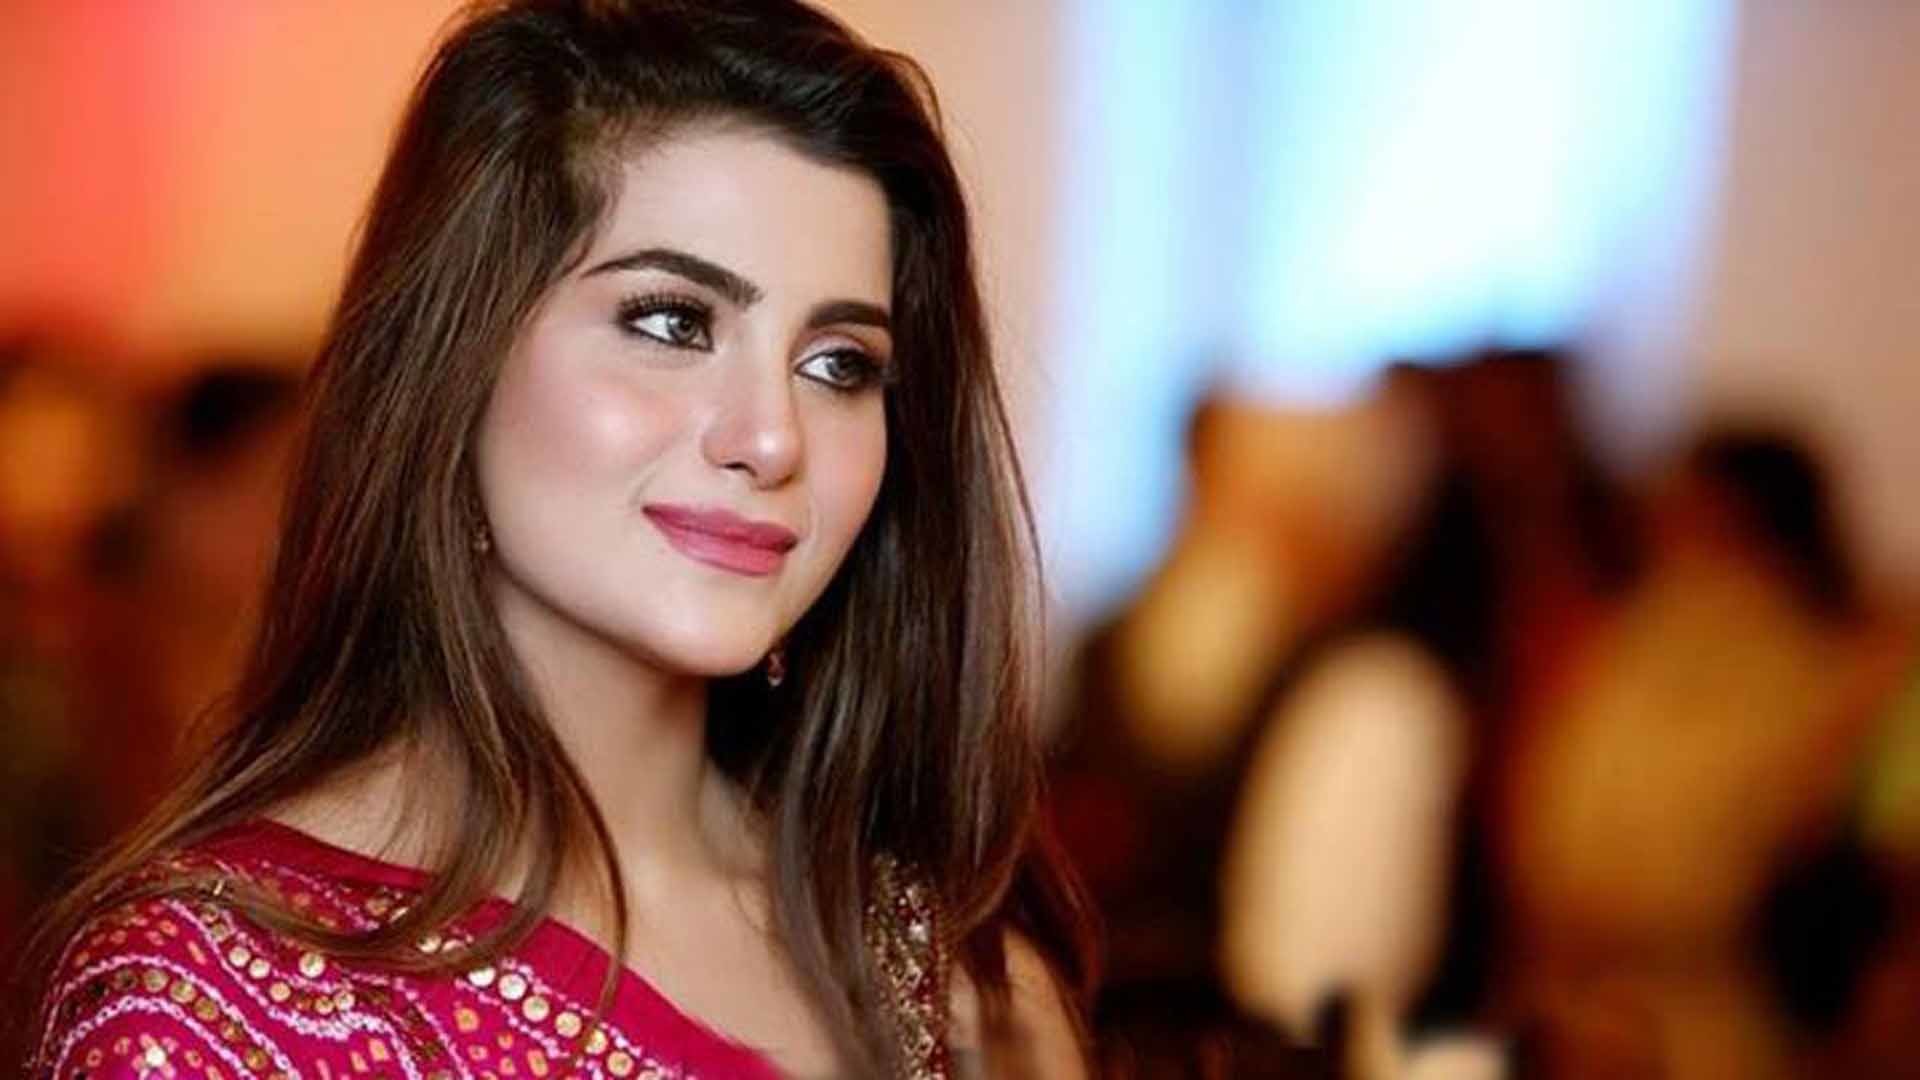 1920x1080 pakistani beautiful girl hd images, photos and wallpapers free download,